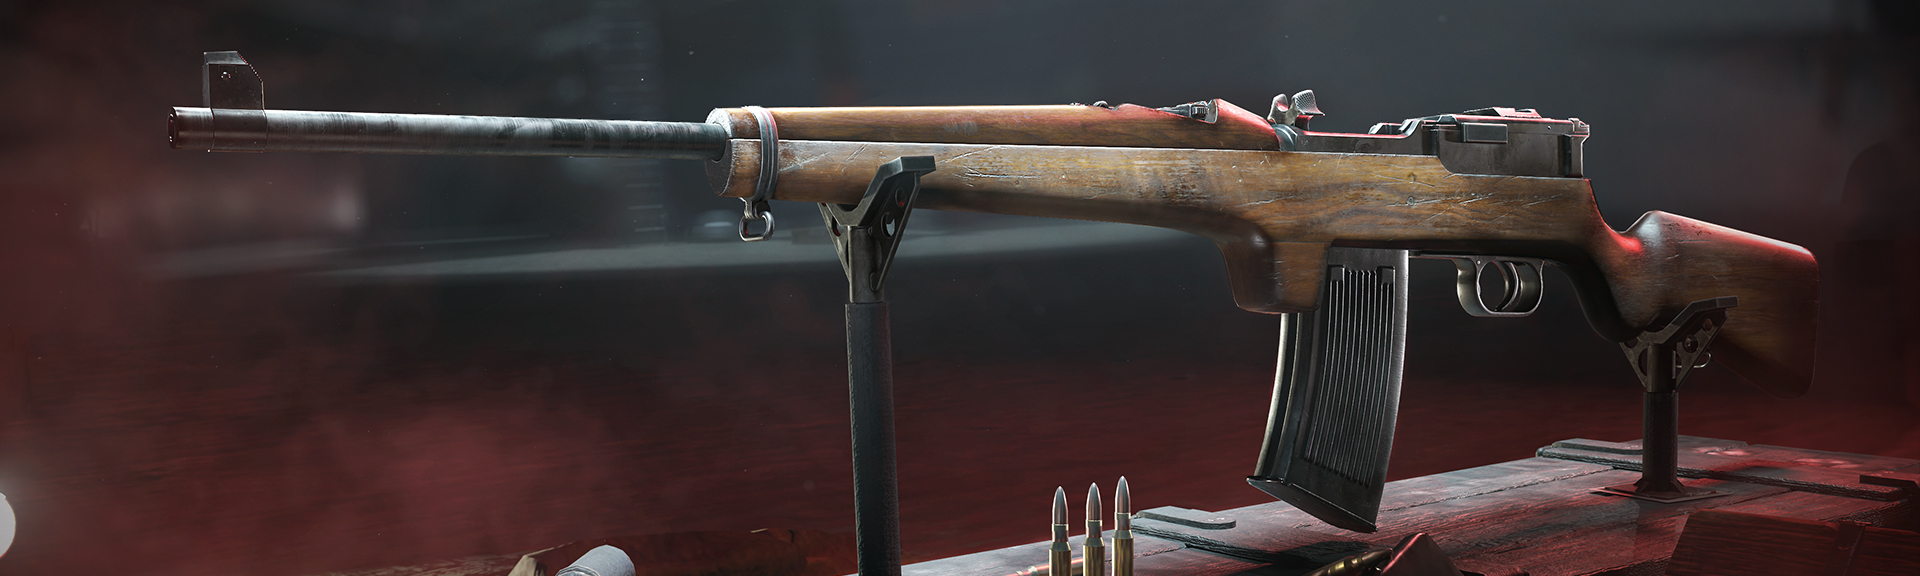 CoD Warzone Season 3: See new weapons, weapon combinations and more